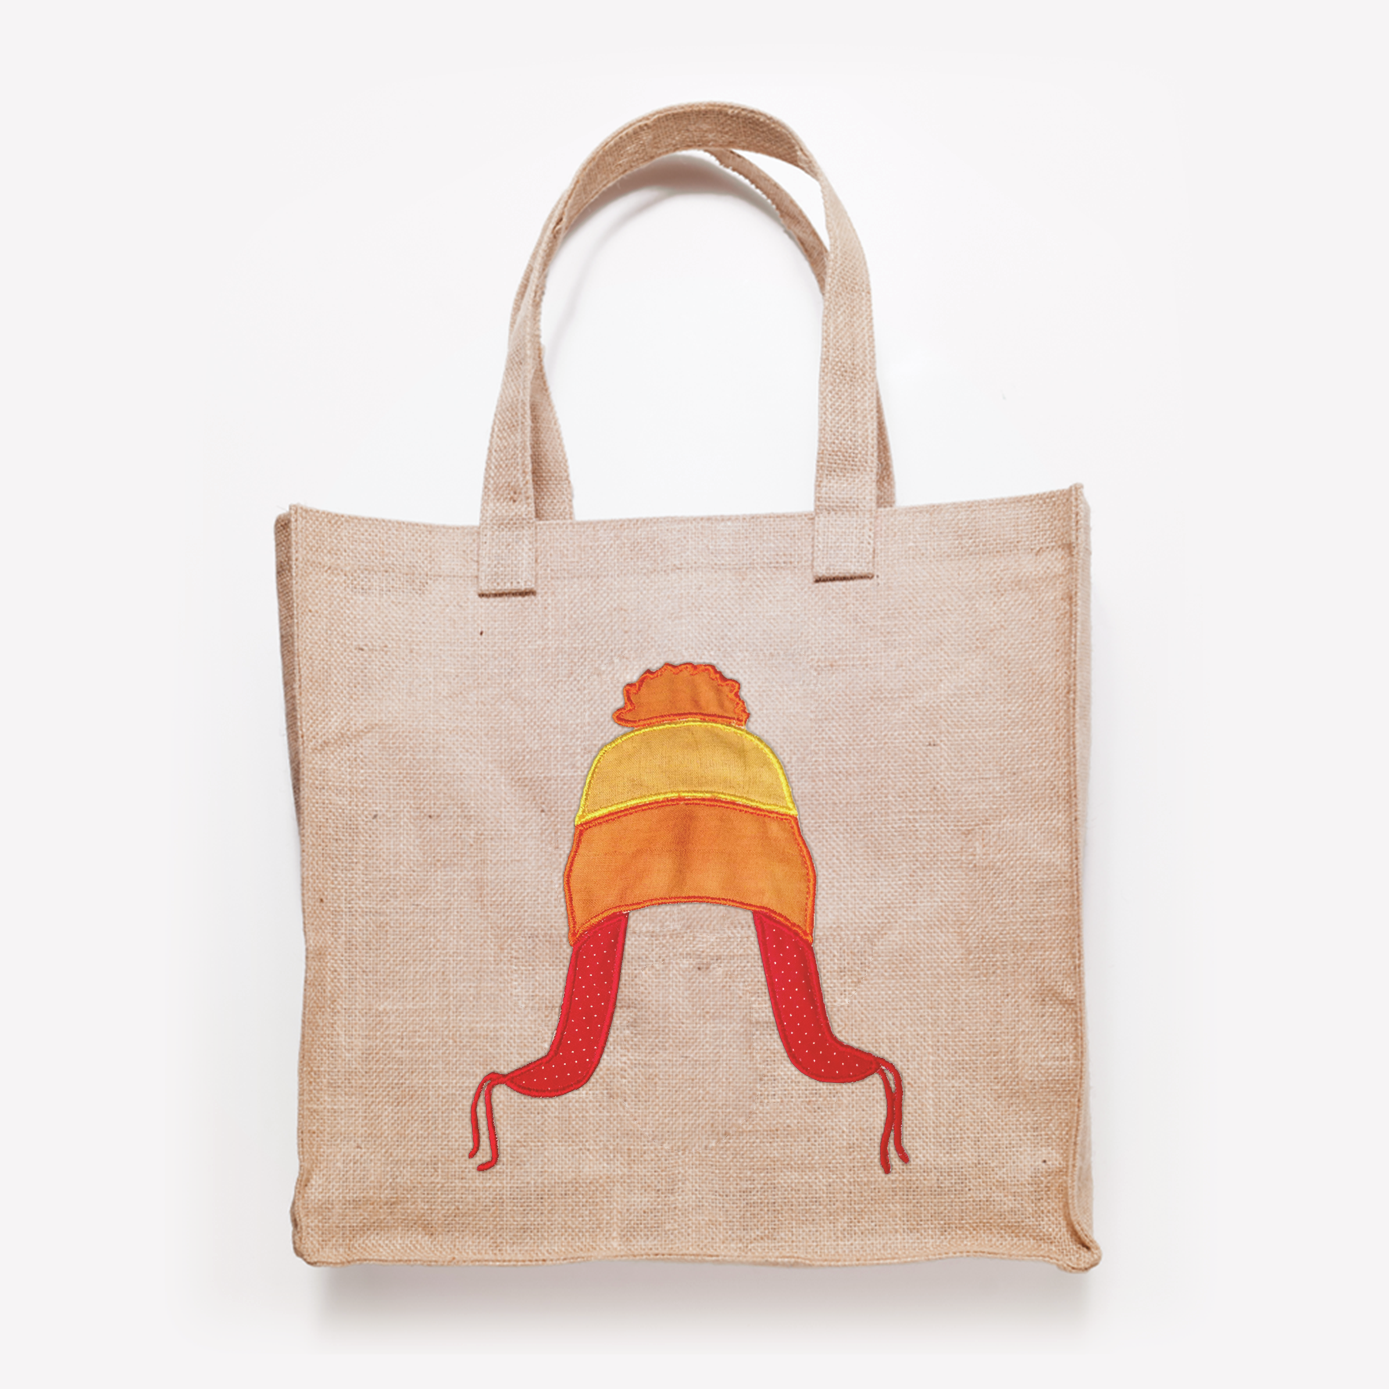 Tote bag with an applique design of a tri-colored winter hat with flaps and a pom pom